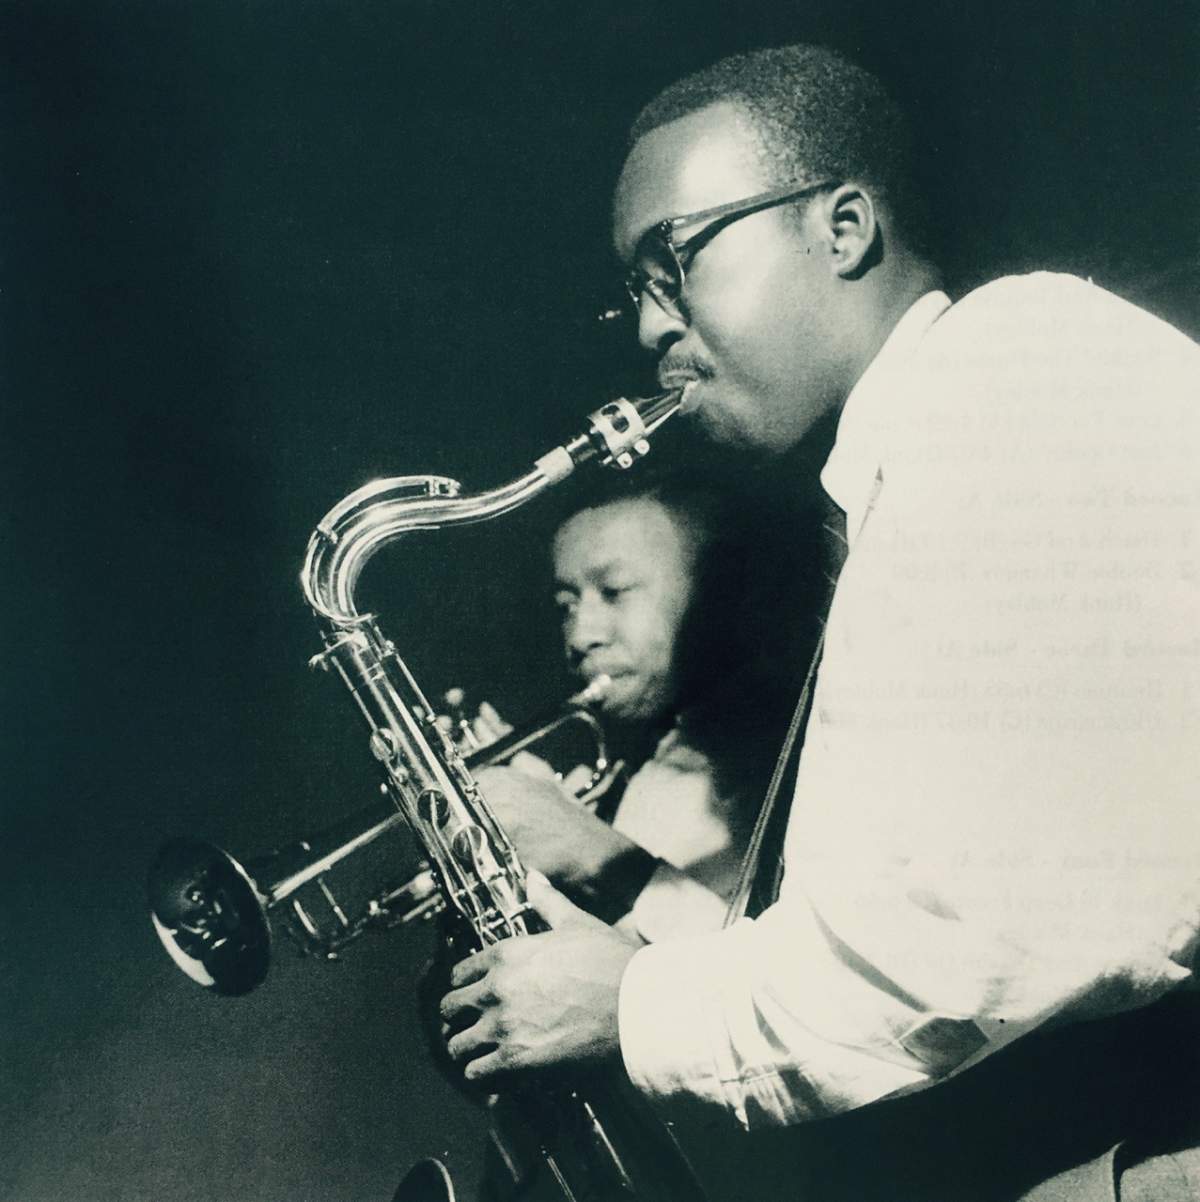 Trumpeter Lee Morgan and saxophonist Hank Mobley recording for the album PECKIN' TIME in 1958.  (Photo by Francis Wolff)